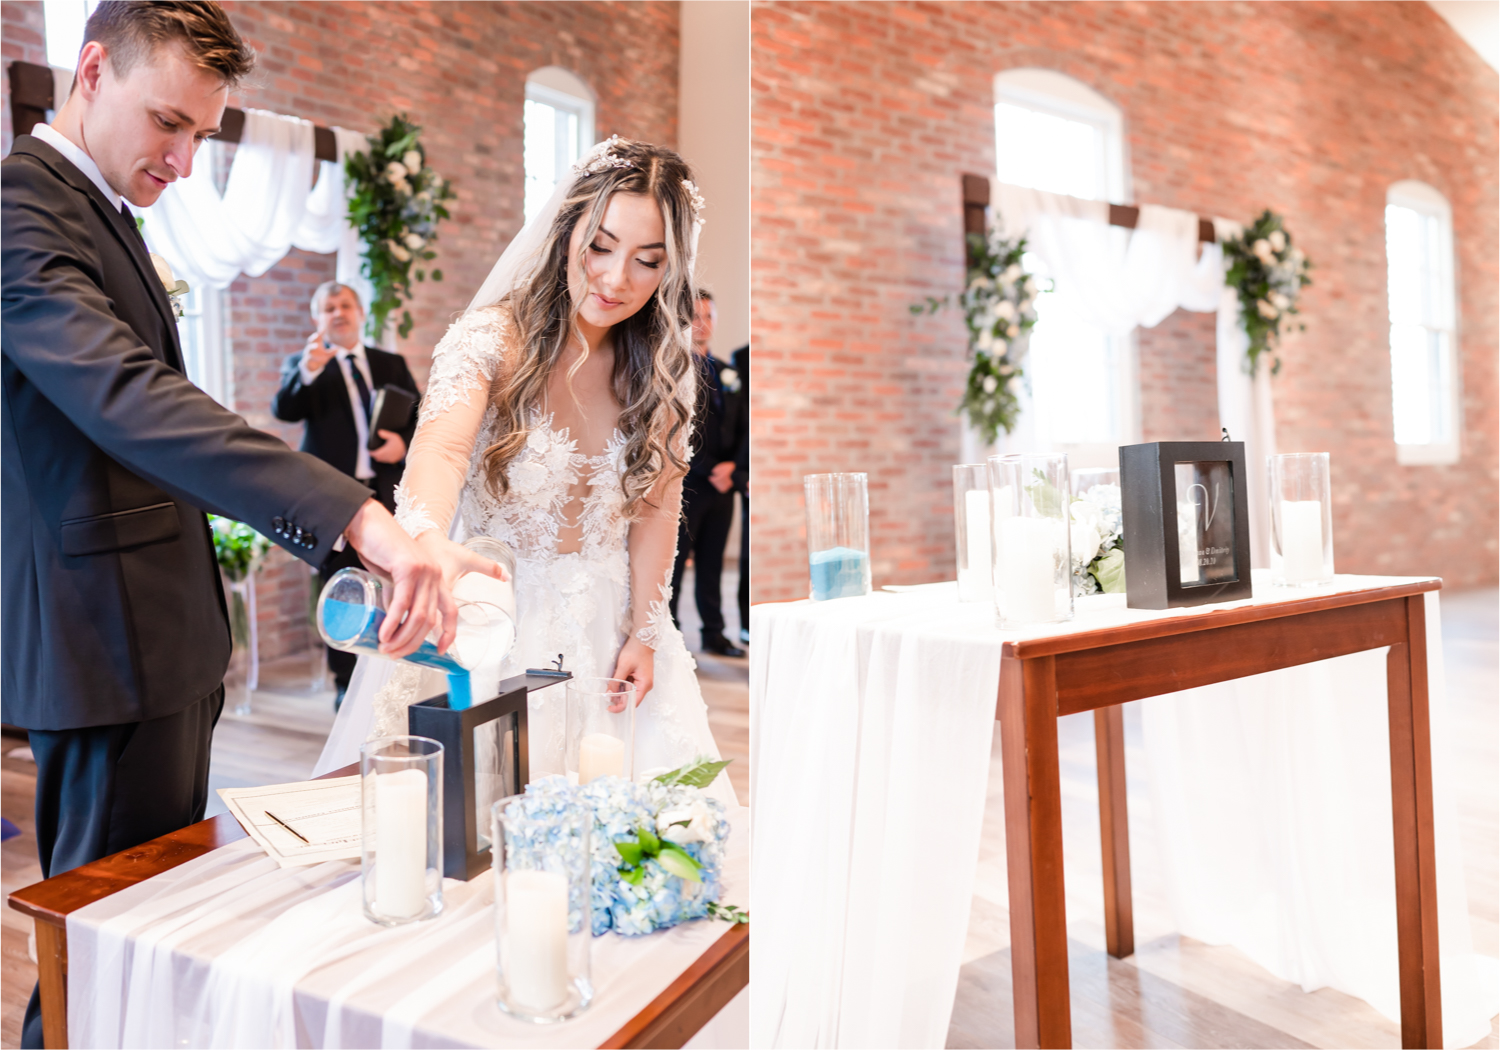 Romantic and Rustic Wedding at The Mill in Windsor | Britni Girard Photography | Colorado based wedding photography and videography team | Unity Ceremony with sand in glass case